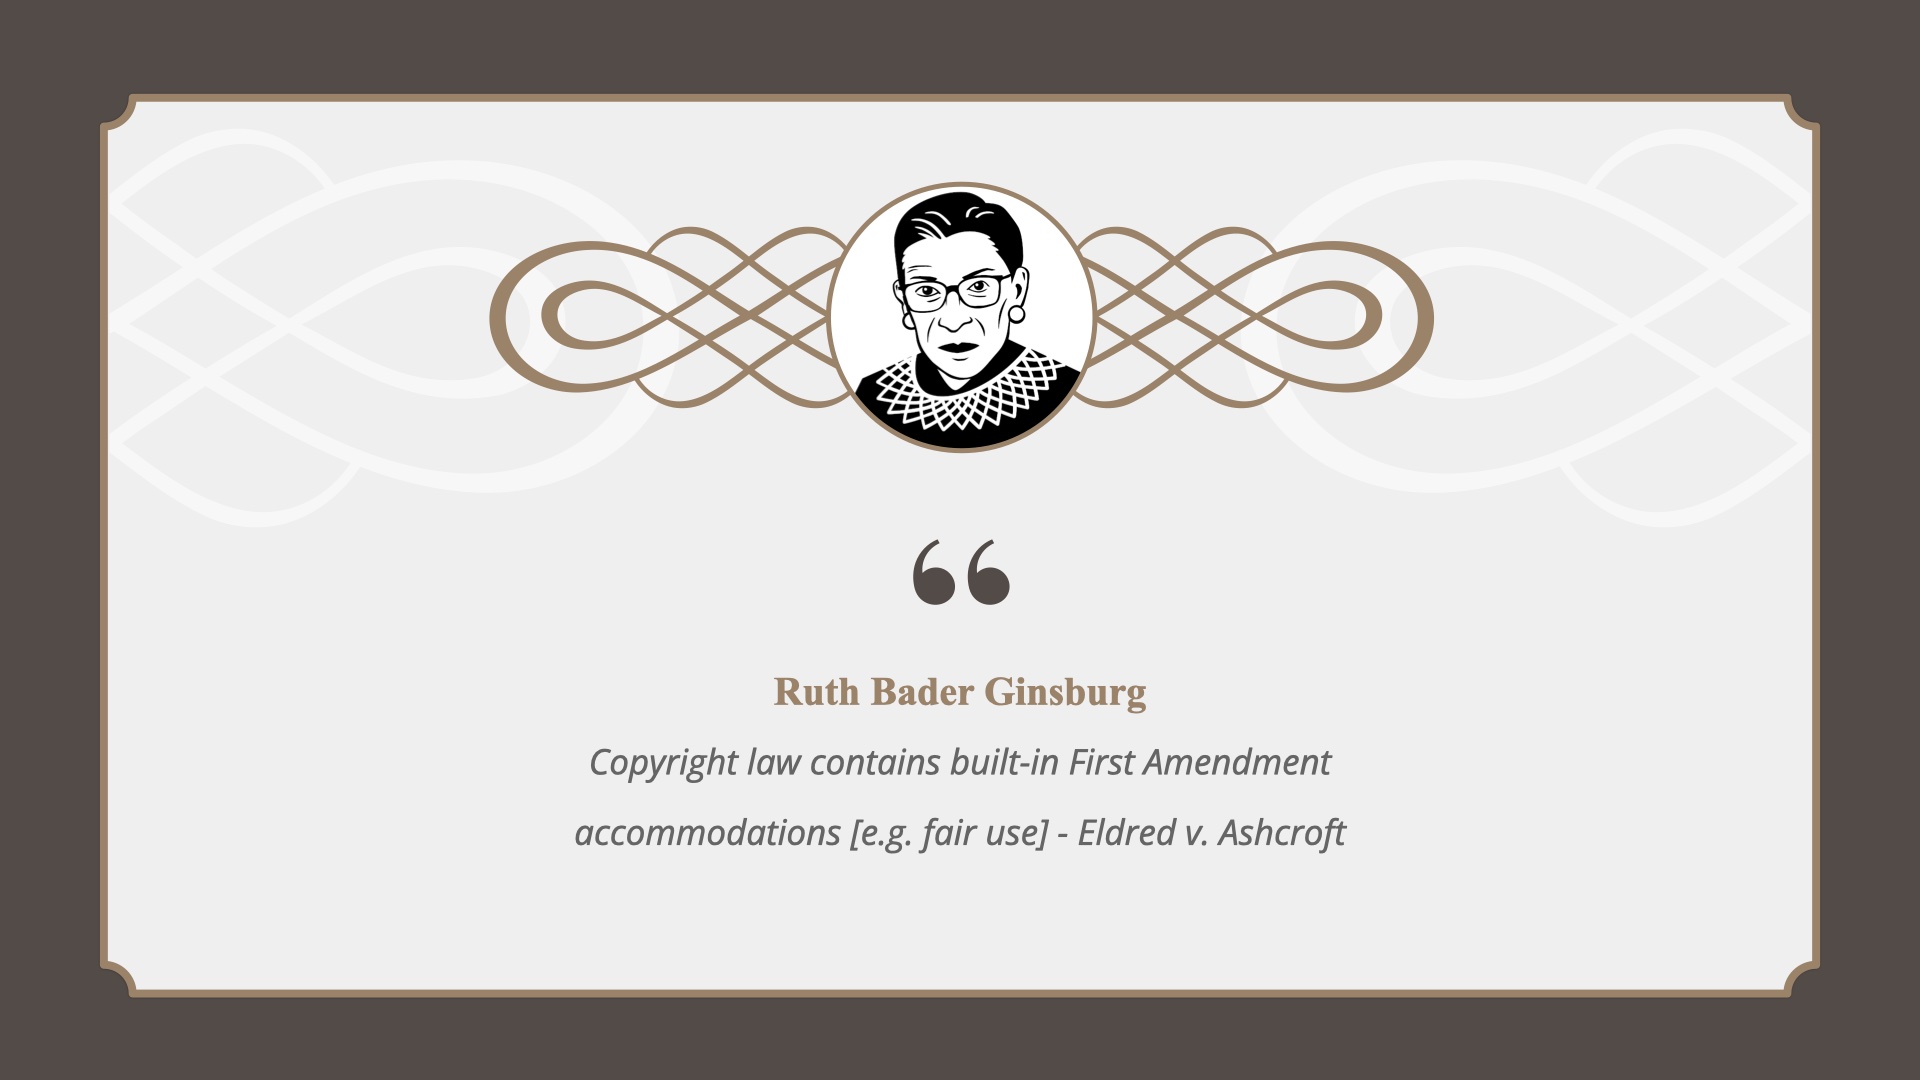 Image Ruth Bader Ginsburg with her name and a short quotation 'Copyright law contains built-in First Amendment accommodations [e.g. fair use] - Eldred v. Ashcroft'